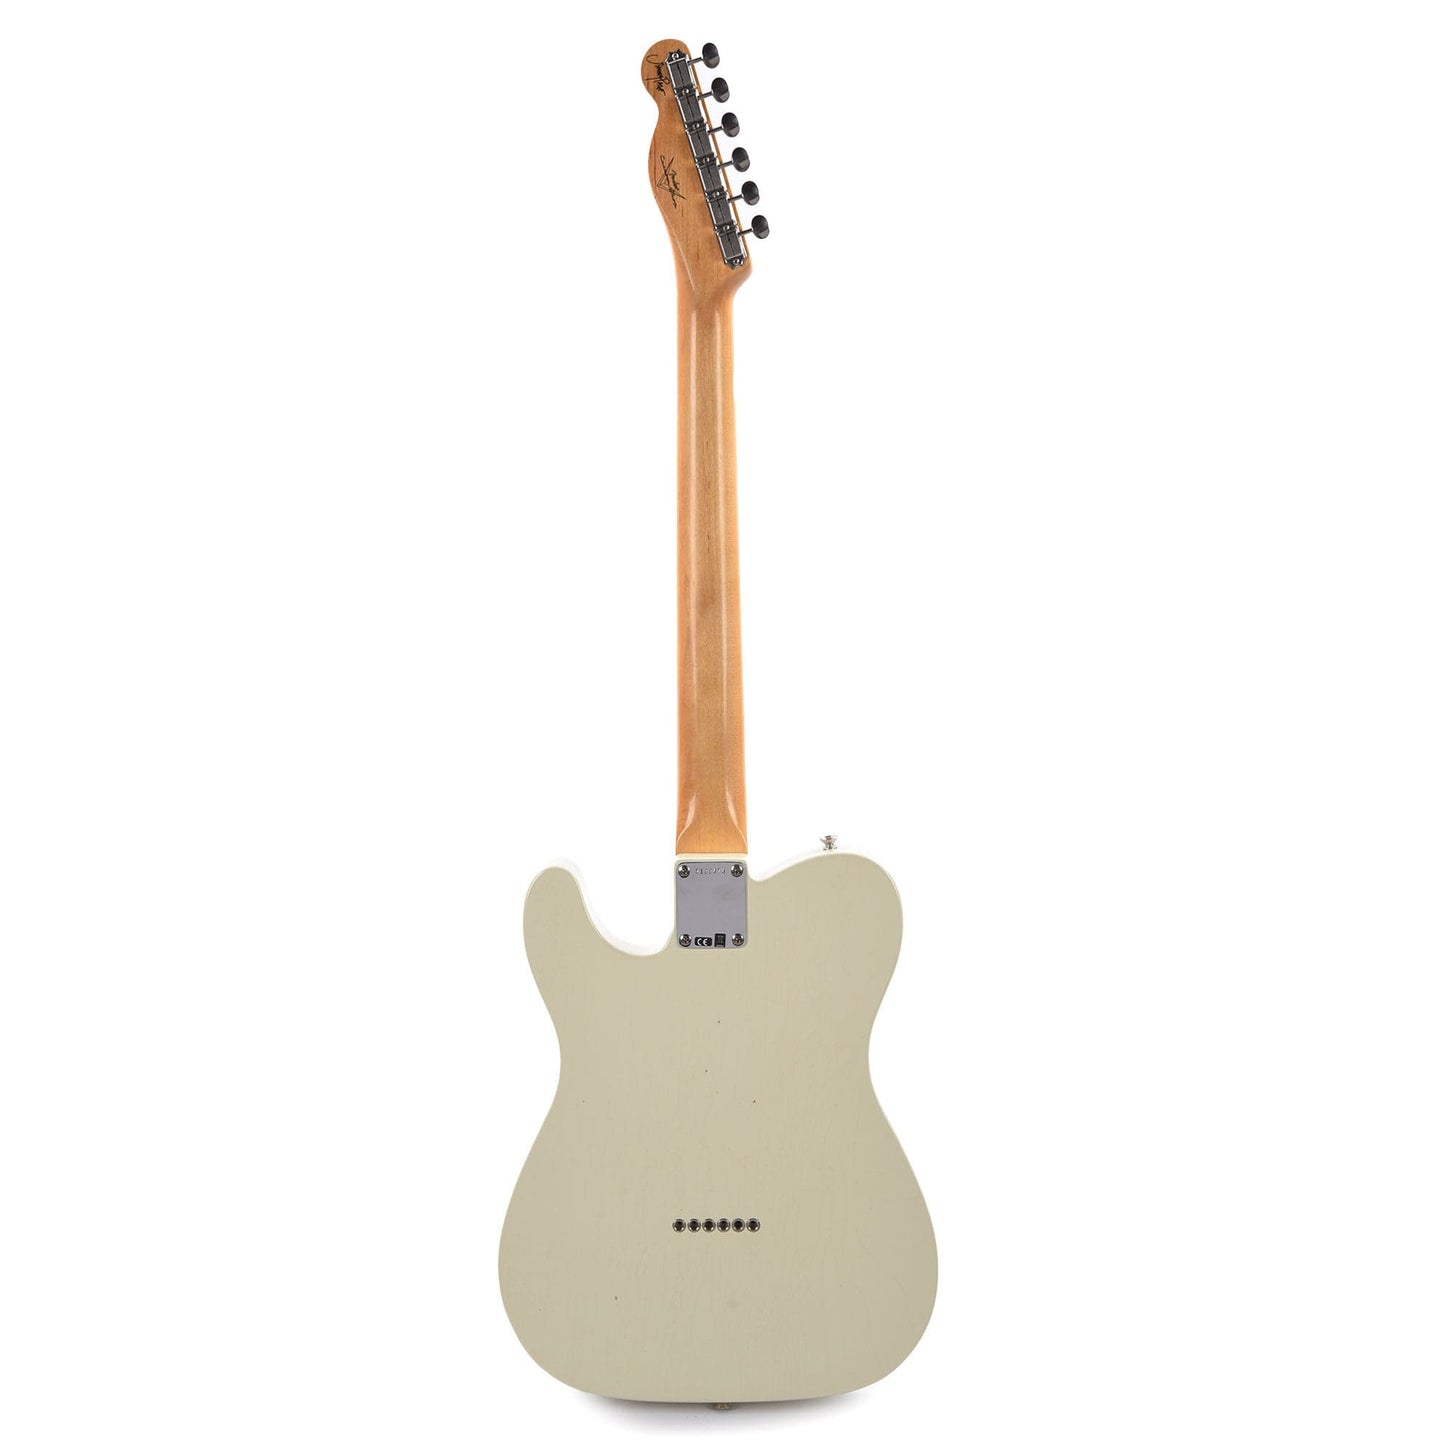 Fender Custom Shop Artist Jimmy Page Signature Telecaster Journeyman Relic White Blonde Electric Guitars / Solid Body